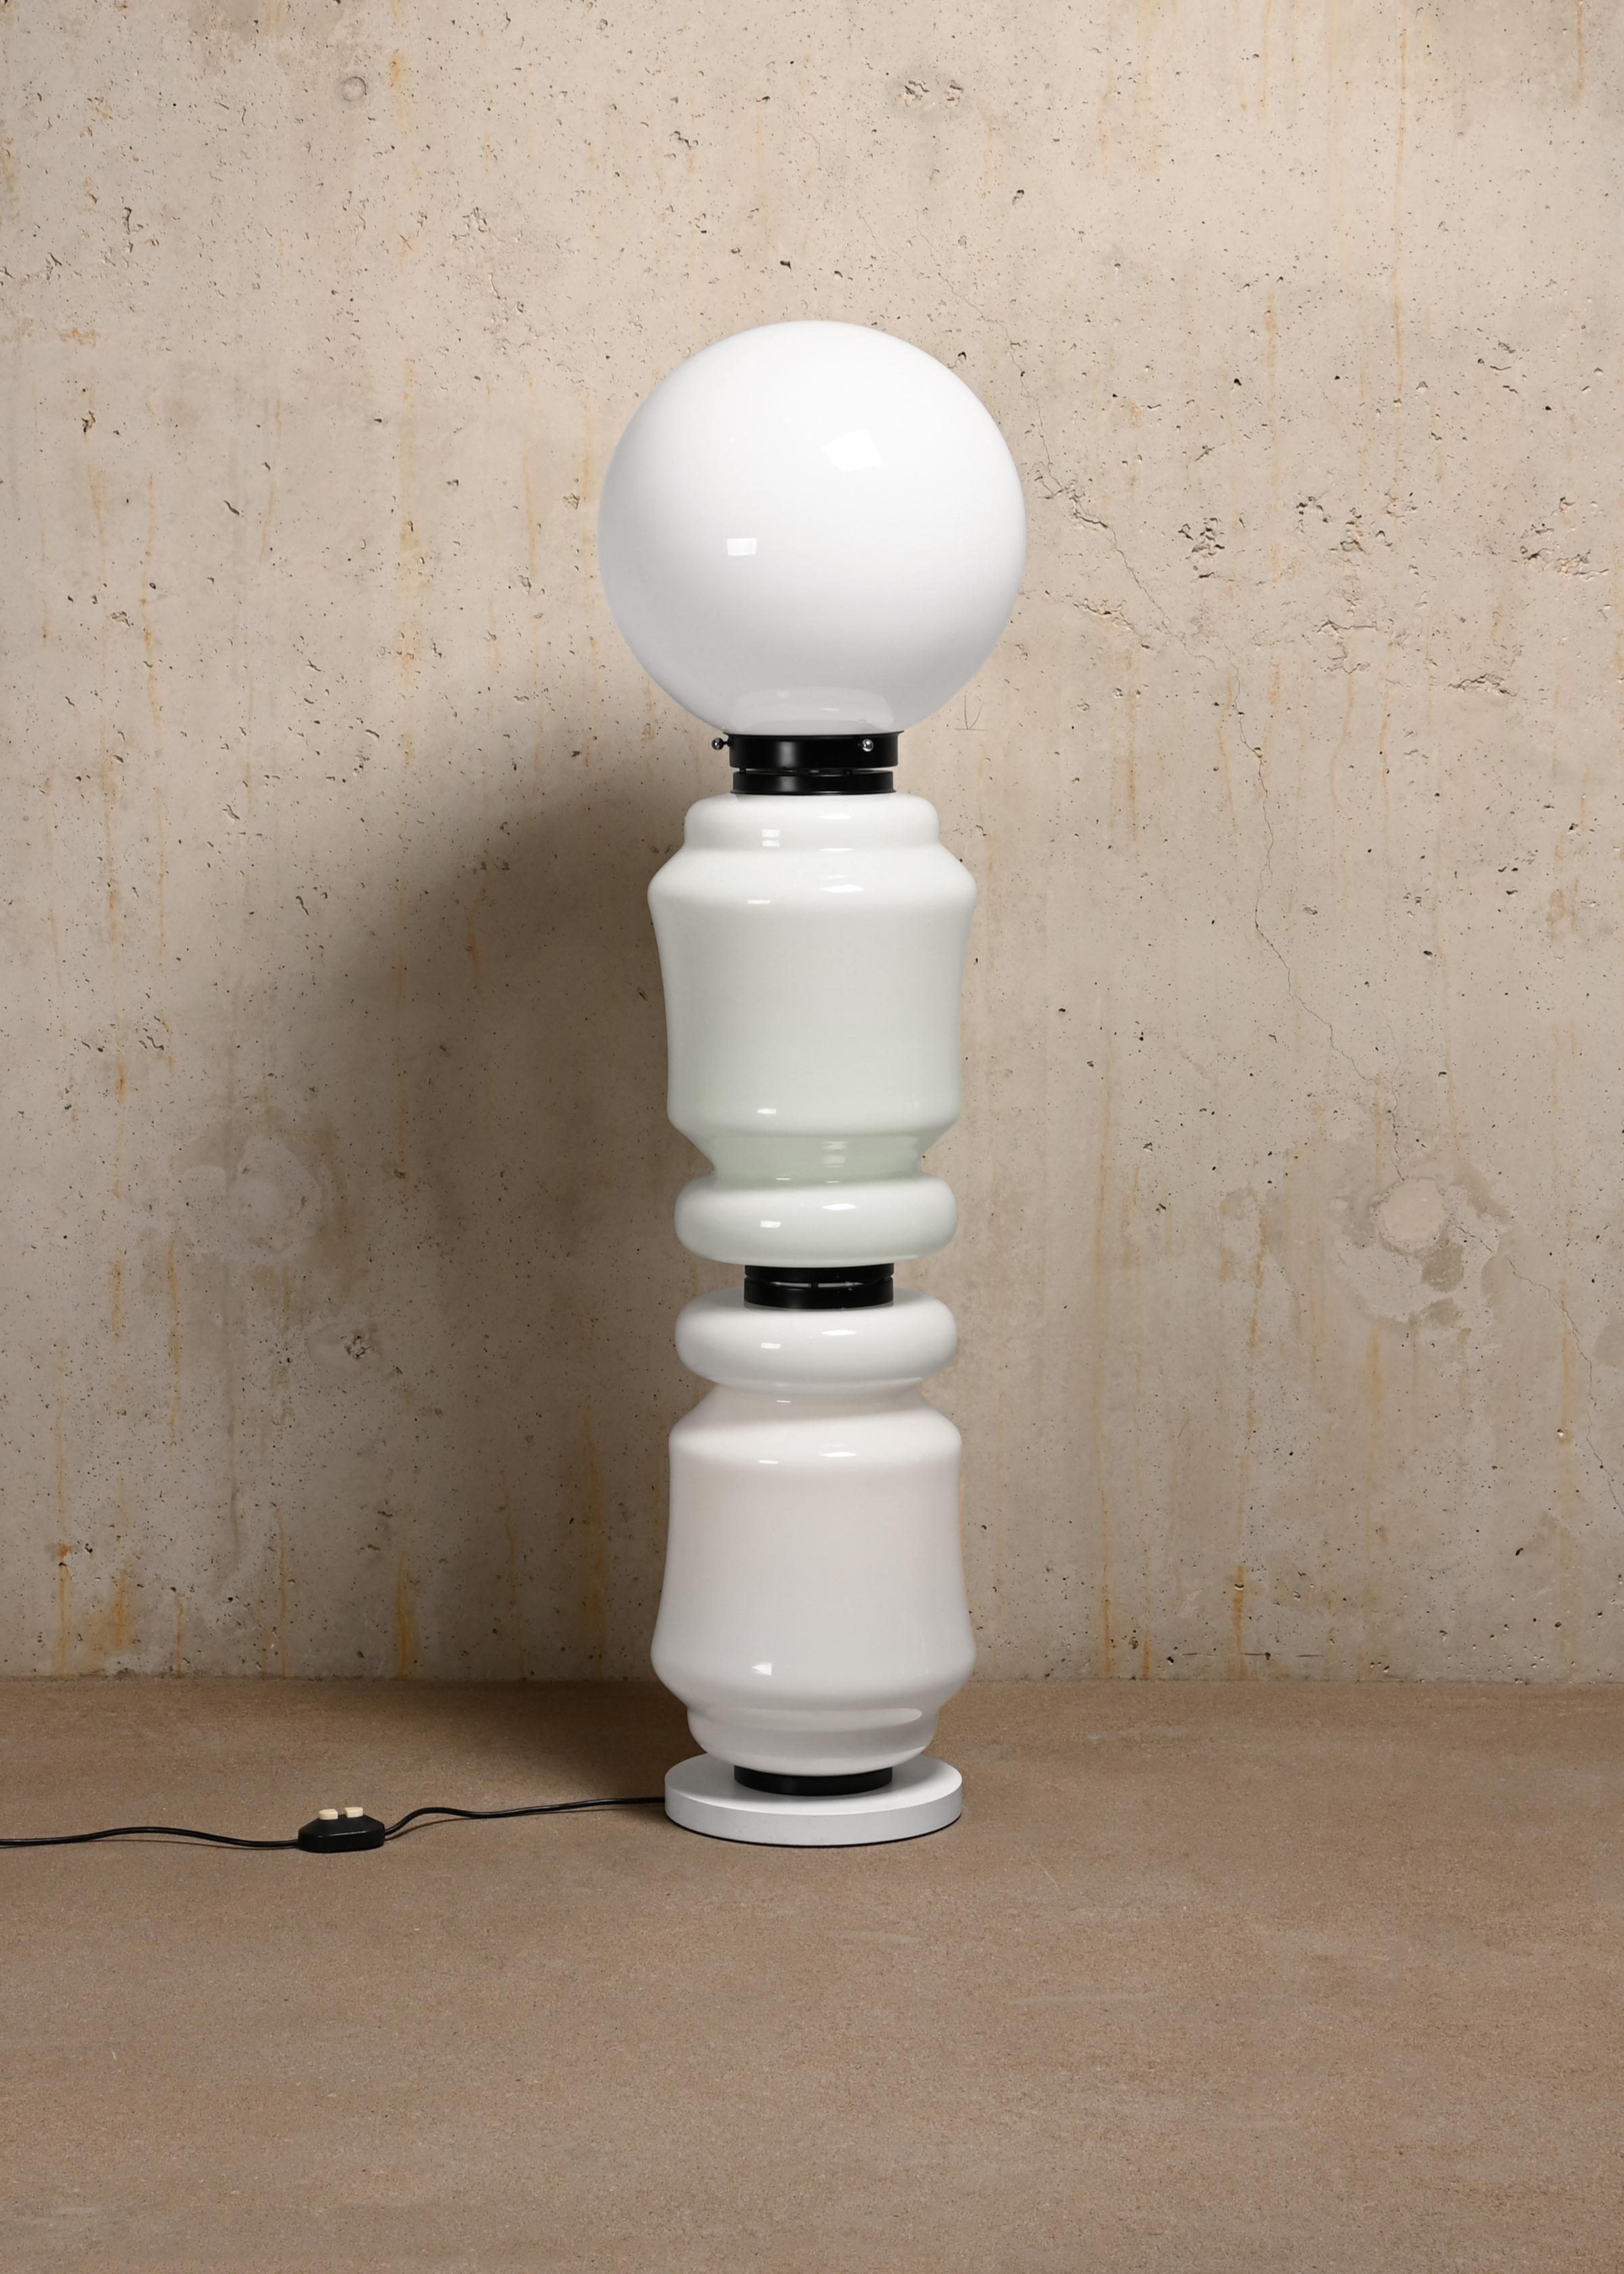 Very nice Monumental Totem floor lamp designed by Carlo Nason for Mazzega, Italy. The lamp has an impressive appearance due to shape and size and is made up of a white steel leg and 3 glass panels connected with black rings. All in very good